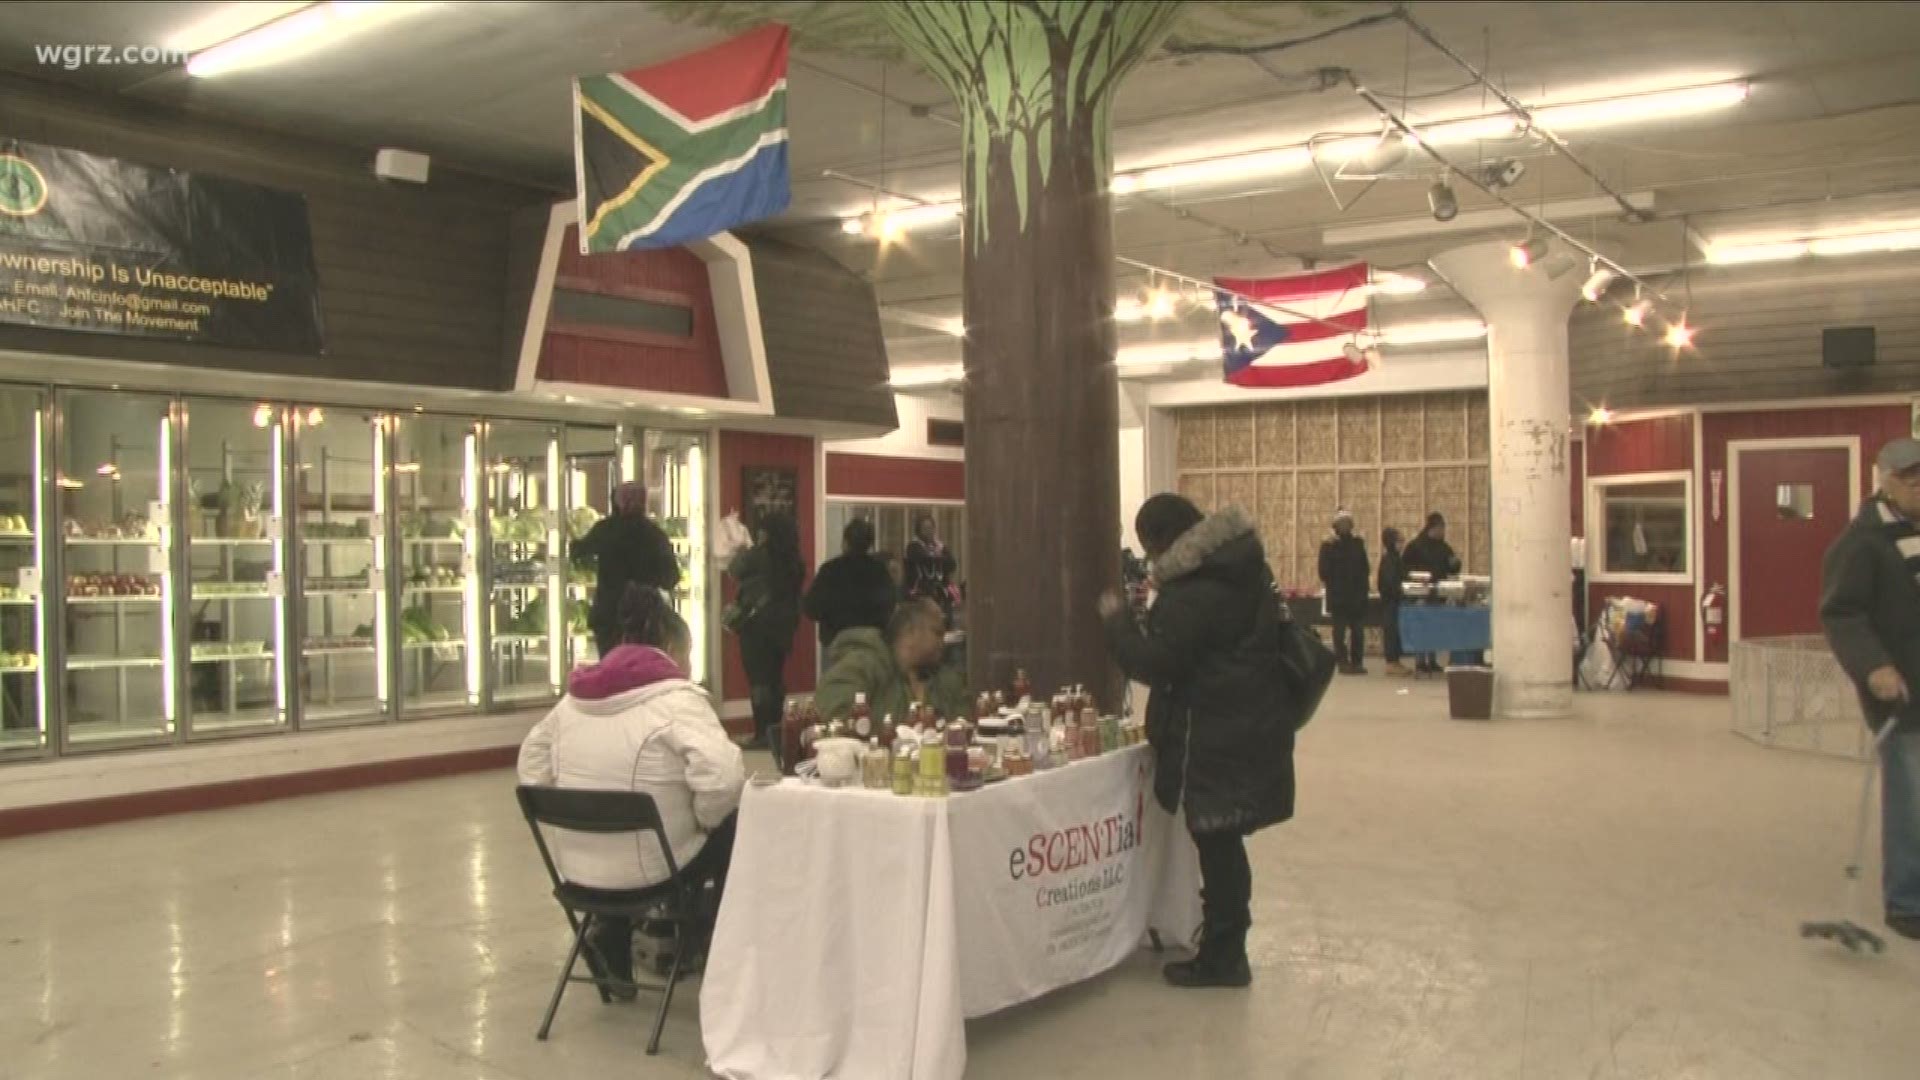 Location offers fresh produce, organic personal care products, catered Caribbean food, more.